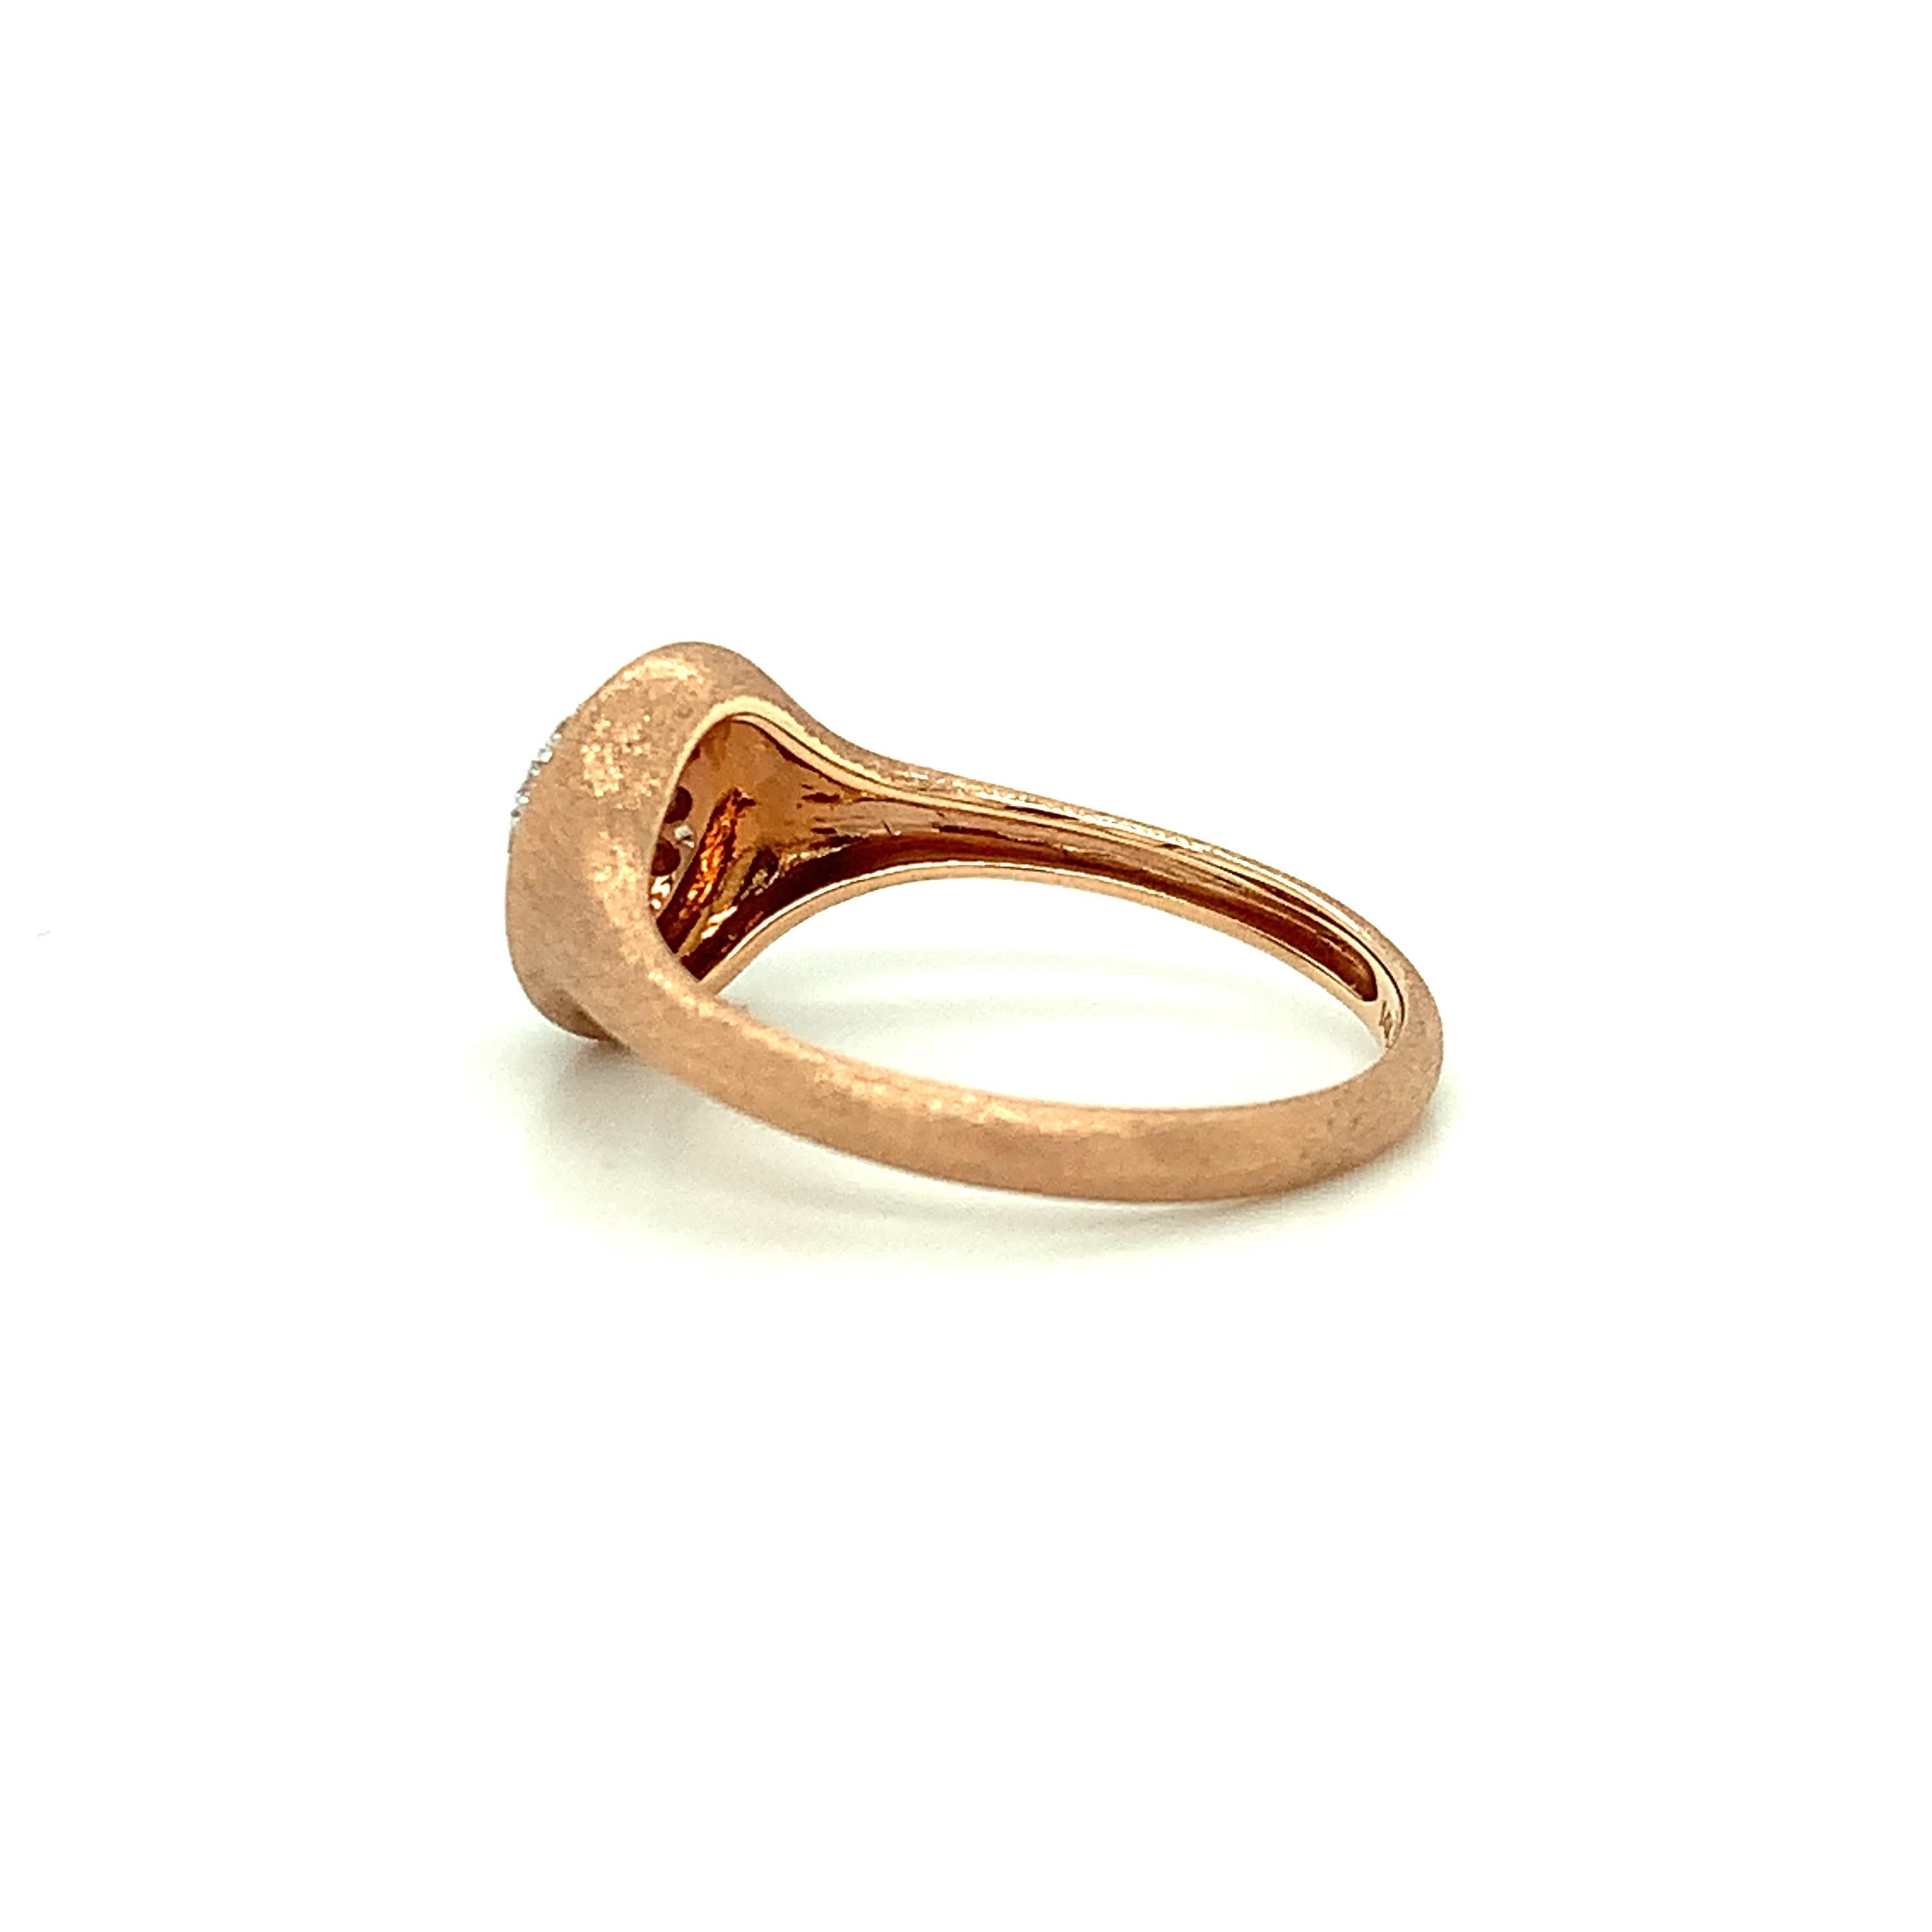 Round Cut Diamond Pave Cocktail Ring in White and Brushed Rose Gold, .22 Carat Total For Sale